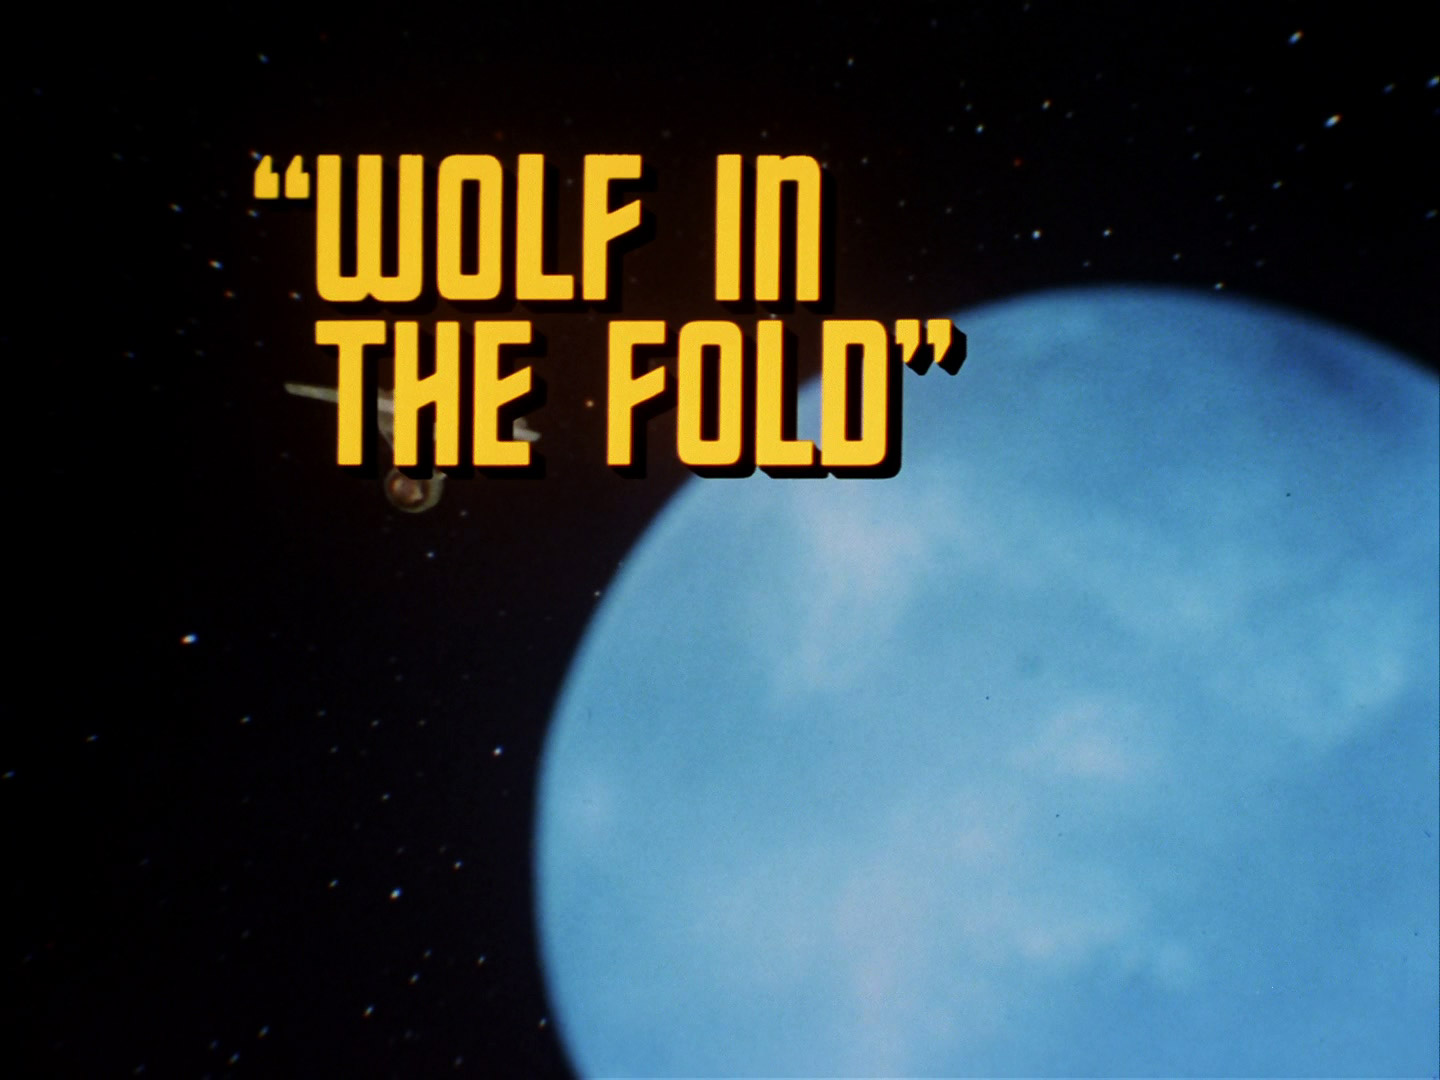 https://tos.trekcore.com/gallery/albums/screencaps/season2/207-wolf-in-the-fold/207-wolf-in-the-fold-br-127.jpg